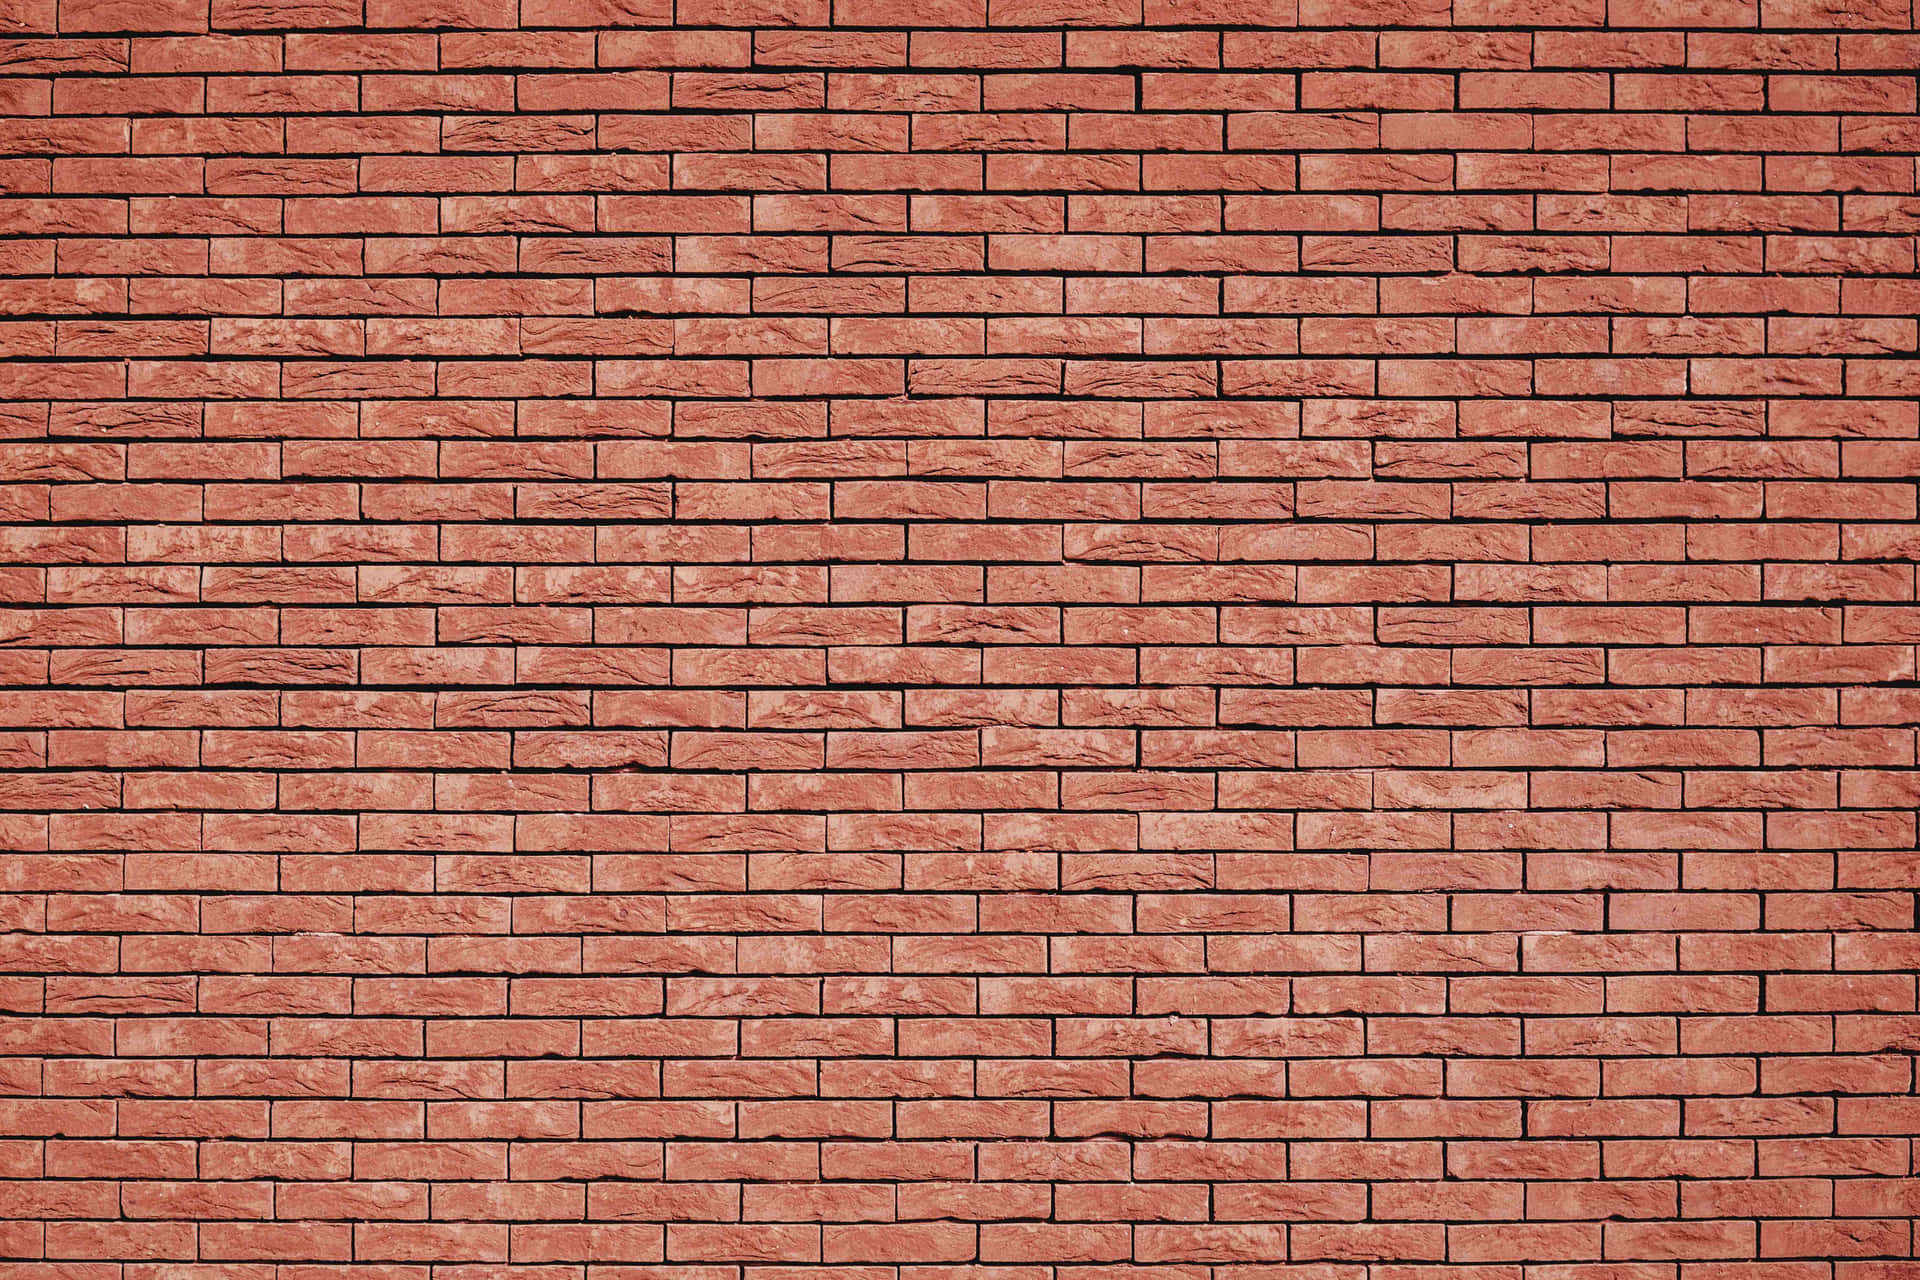 Authentic Old Brick Wall Background